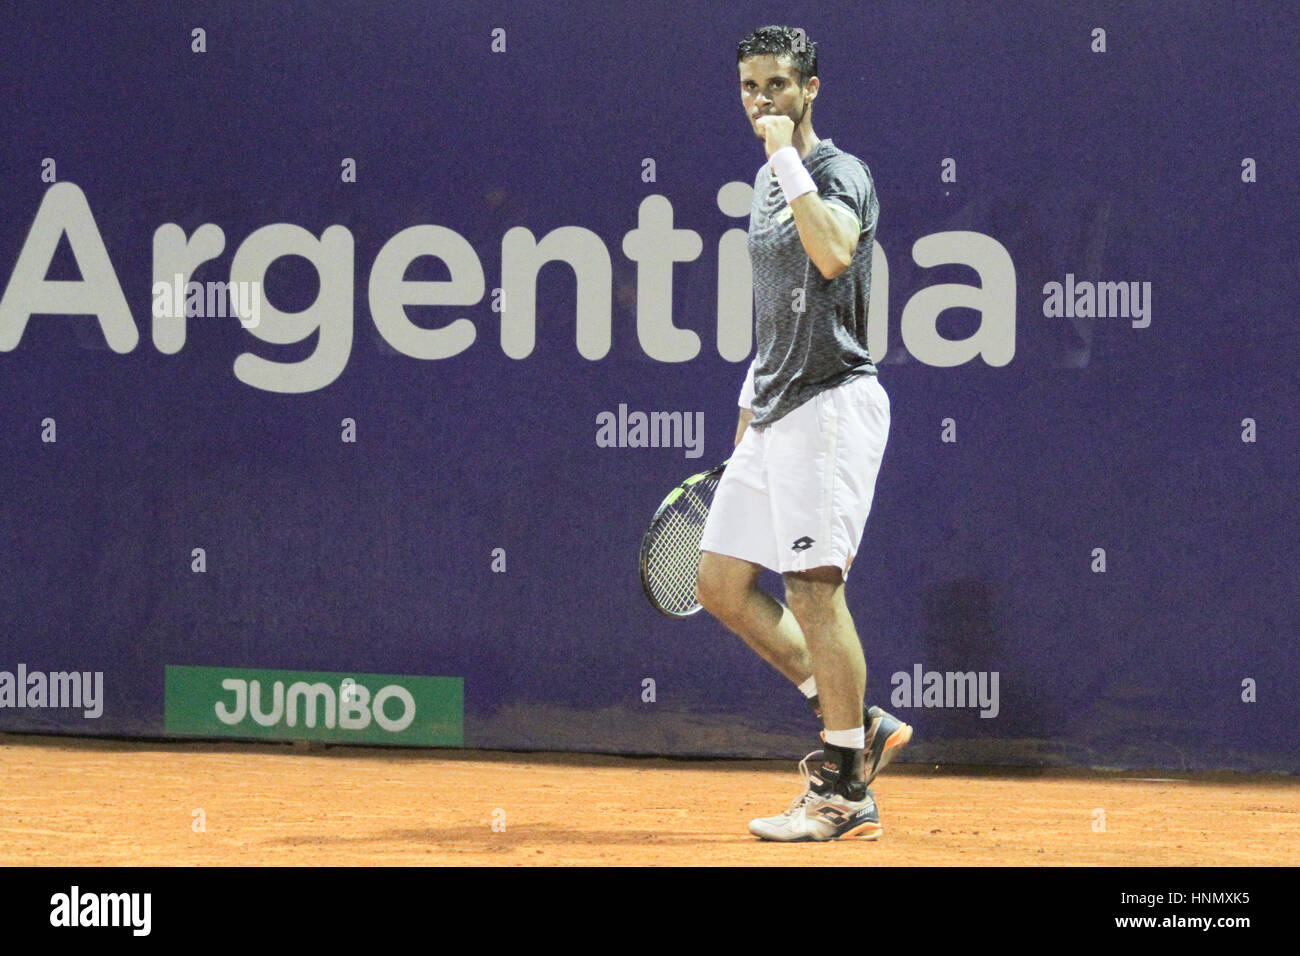 Buenos Aires, Argentina. 14th Feb, 2017. Brazilian player Rogerio Dutra Silva during the first round of main draw of Buenos Aires ATP 250.  Credit: Néstor J. Beremblum/Alamy Live News Stock Photo